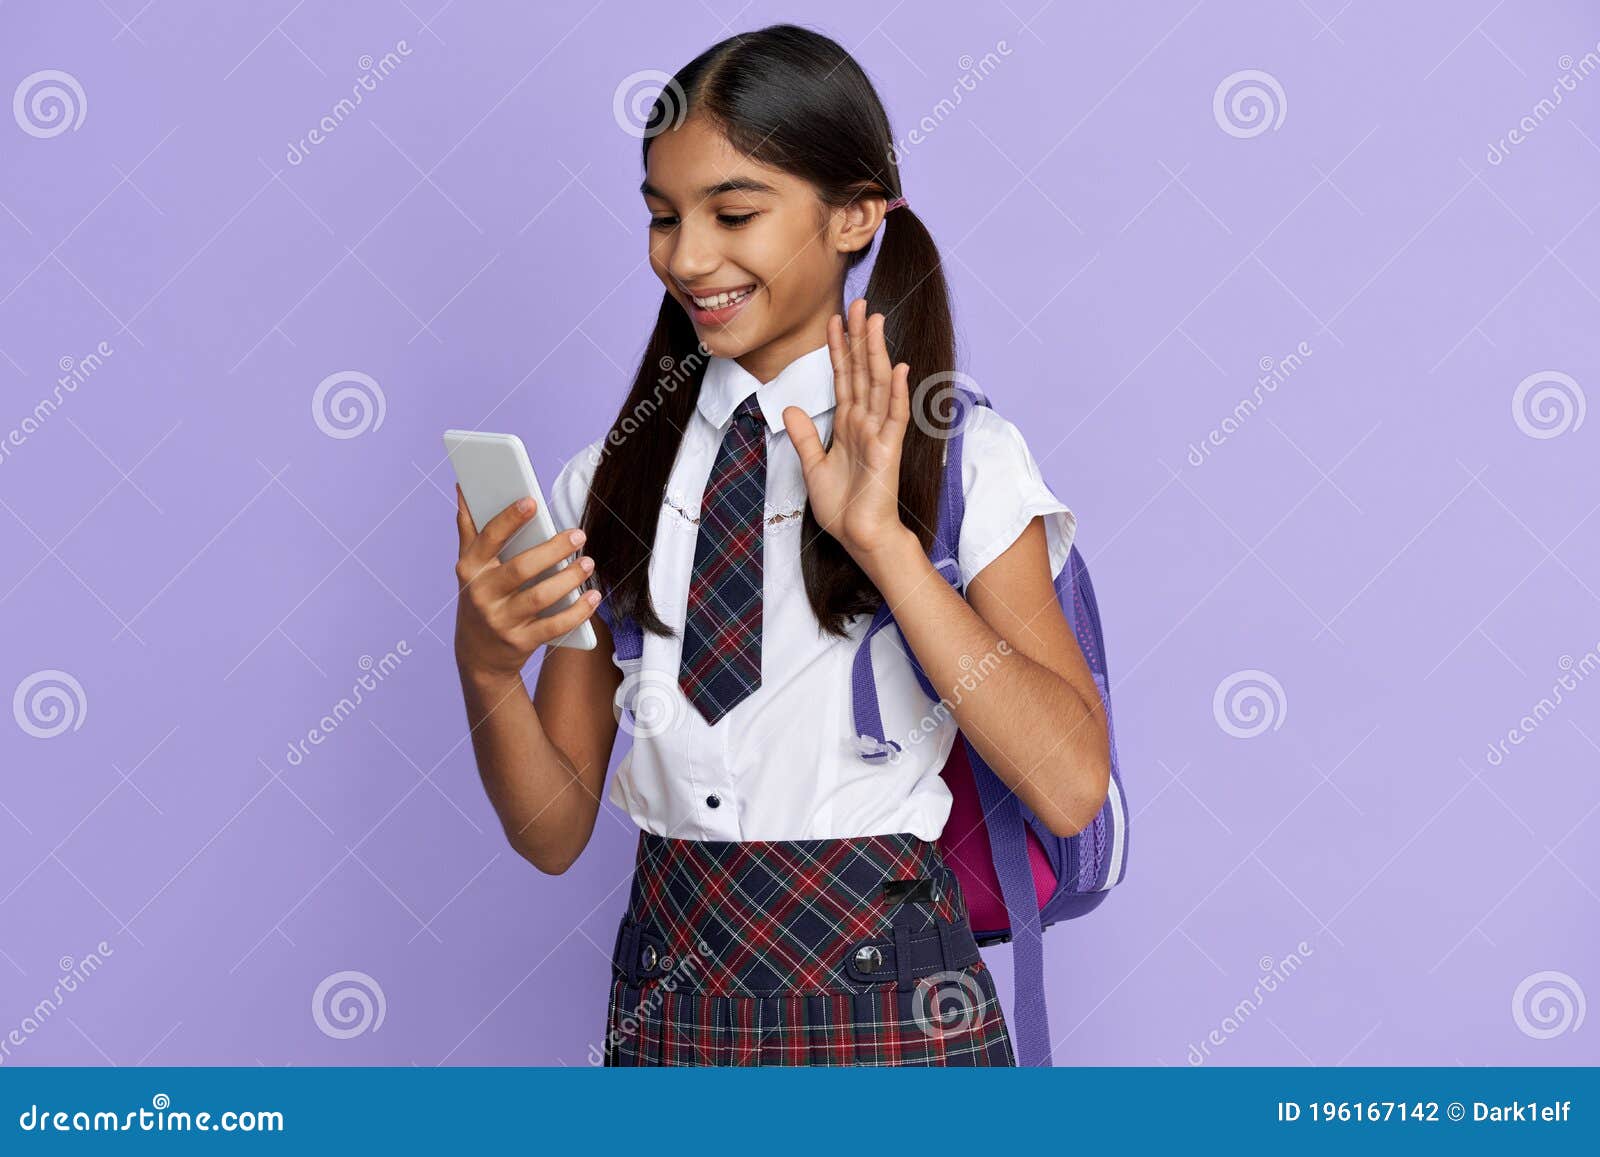 1600px x 1157px - Smiling Indian School Girl Video Calling on Mobile Phone Isolated on  Background. Stock Photo - Image of learn, cellphone: 196167142